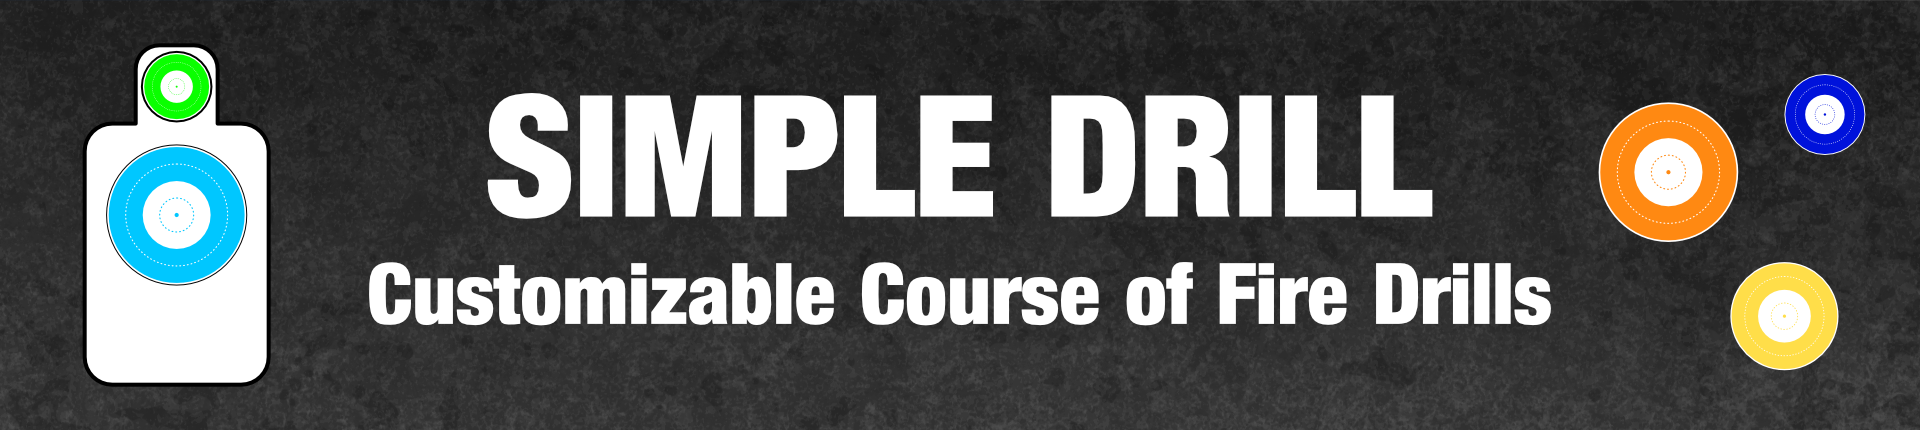 Simple Drill - Customizable Course of Fire Drills